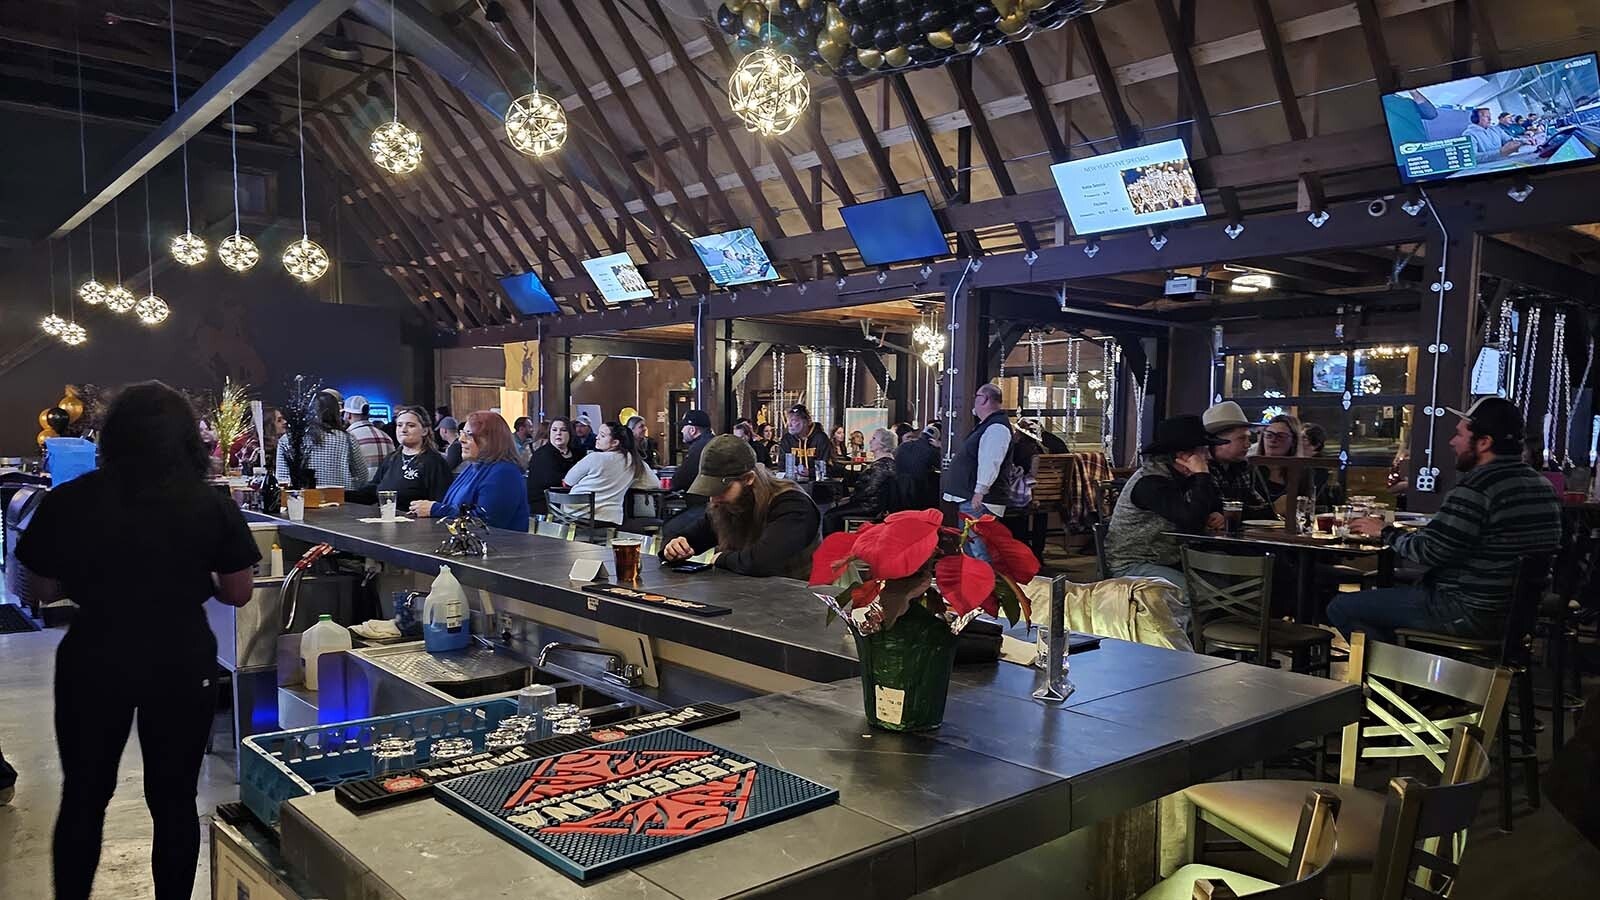 The scene is buzzing at Westby Edge Brewing Company, Cheyenne's newest brewery.